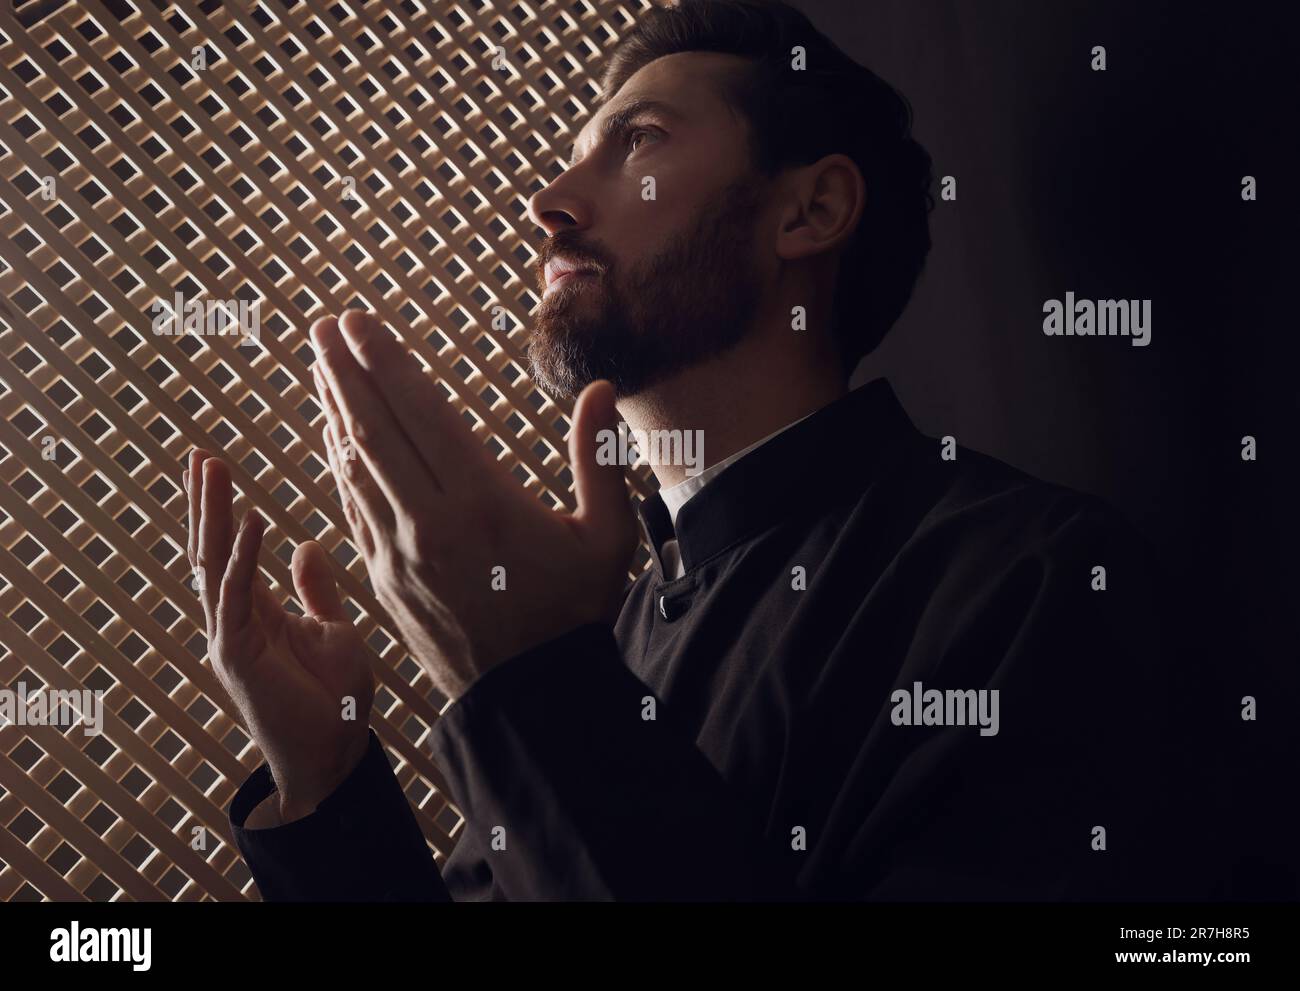 Catholic priest in cassock praying to God in confessional booth Stock Photo